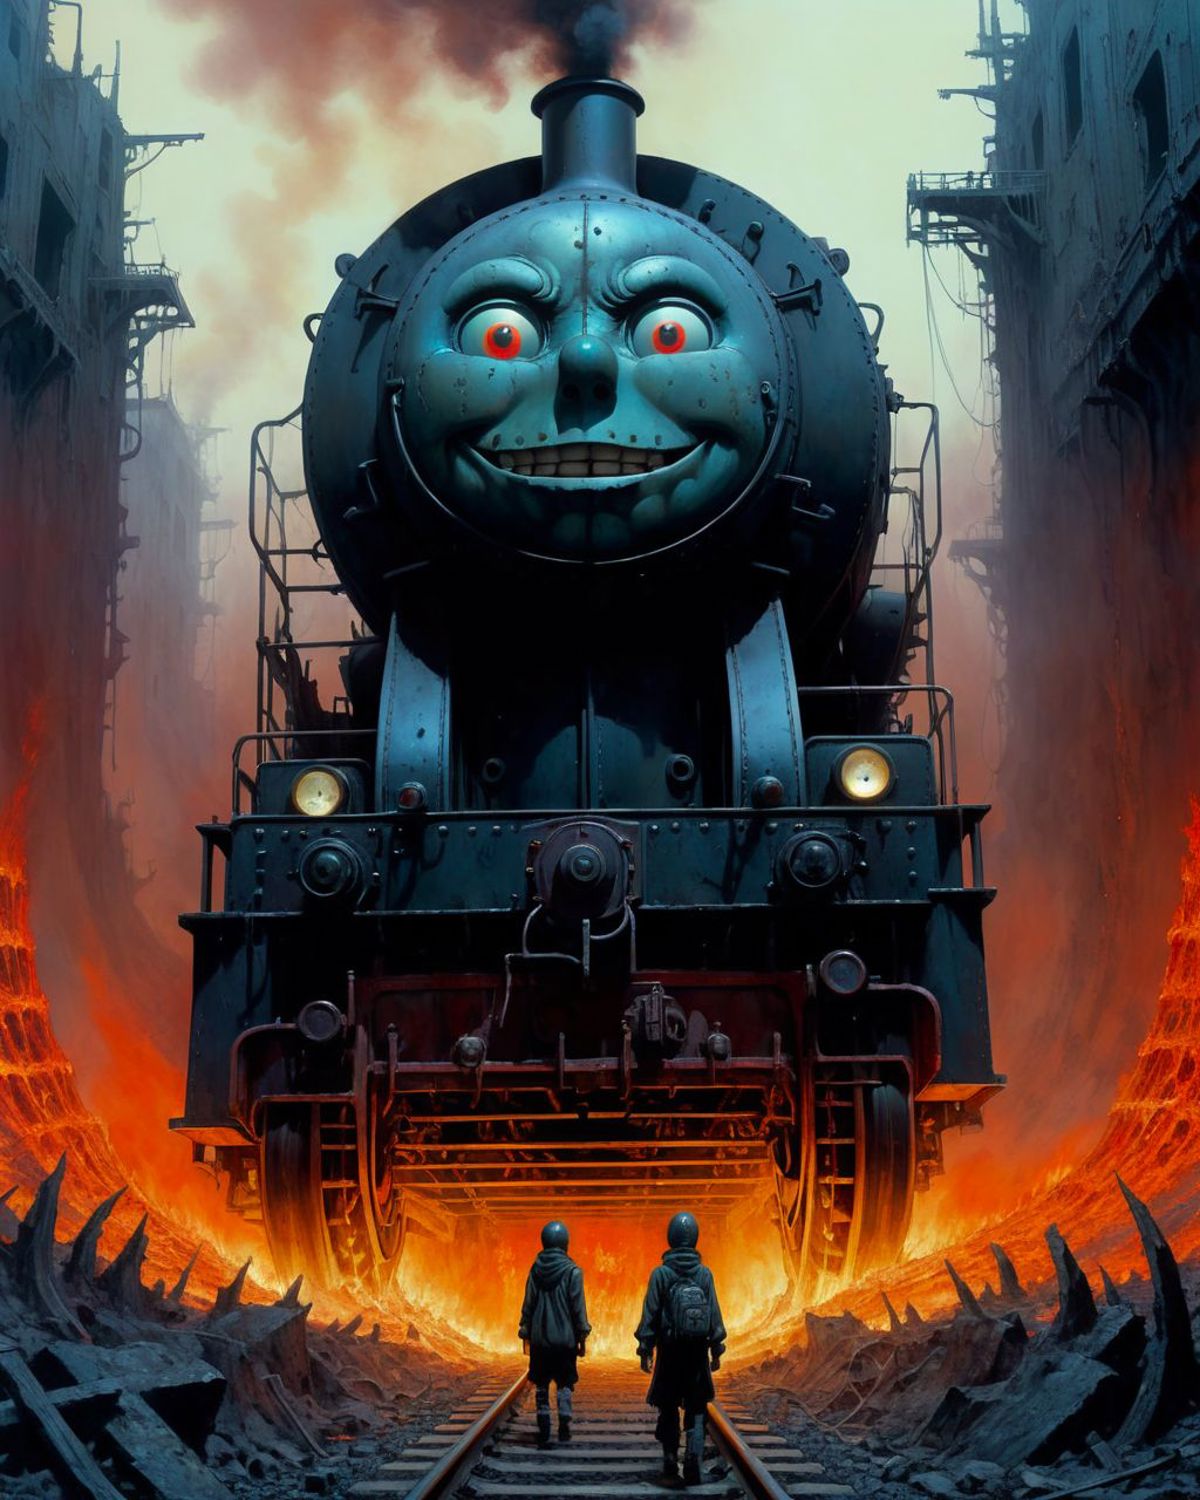 A Fantastical Artistic Illustration of a Train with a Face and Two People Standing in Front of it